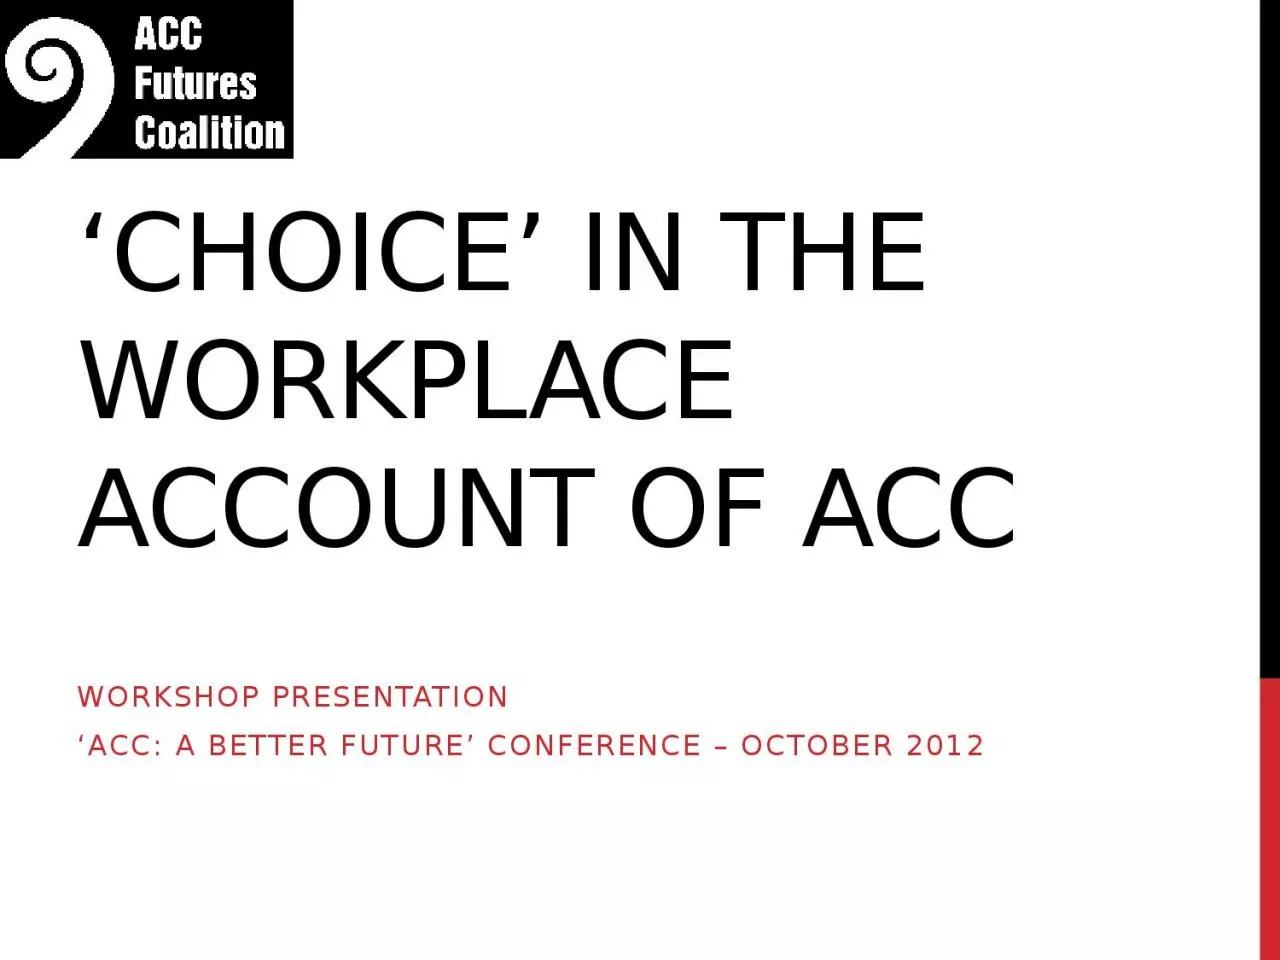 ‘Choice’ in the Workplace account of ACC